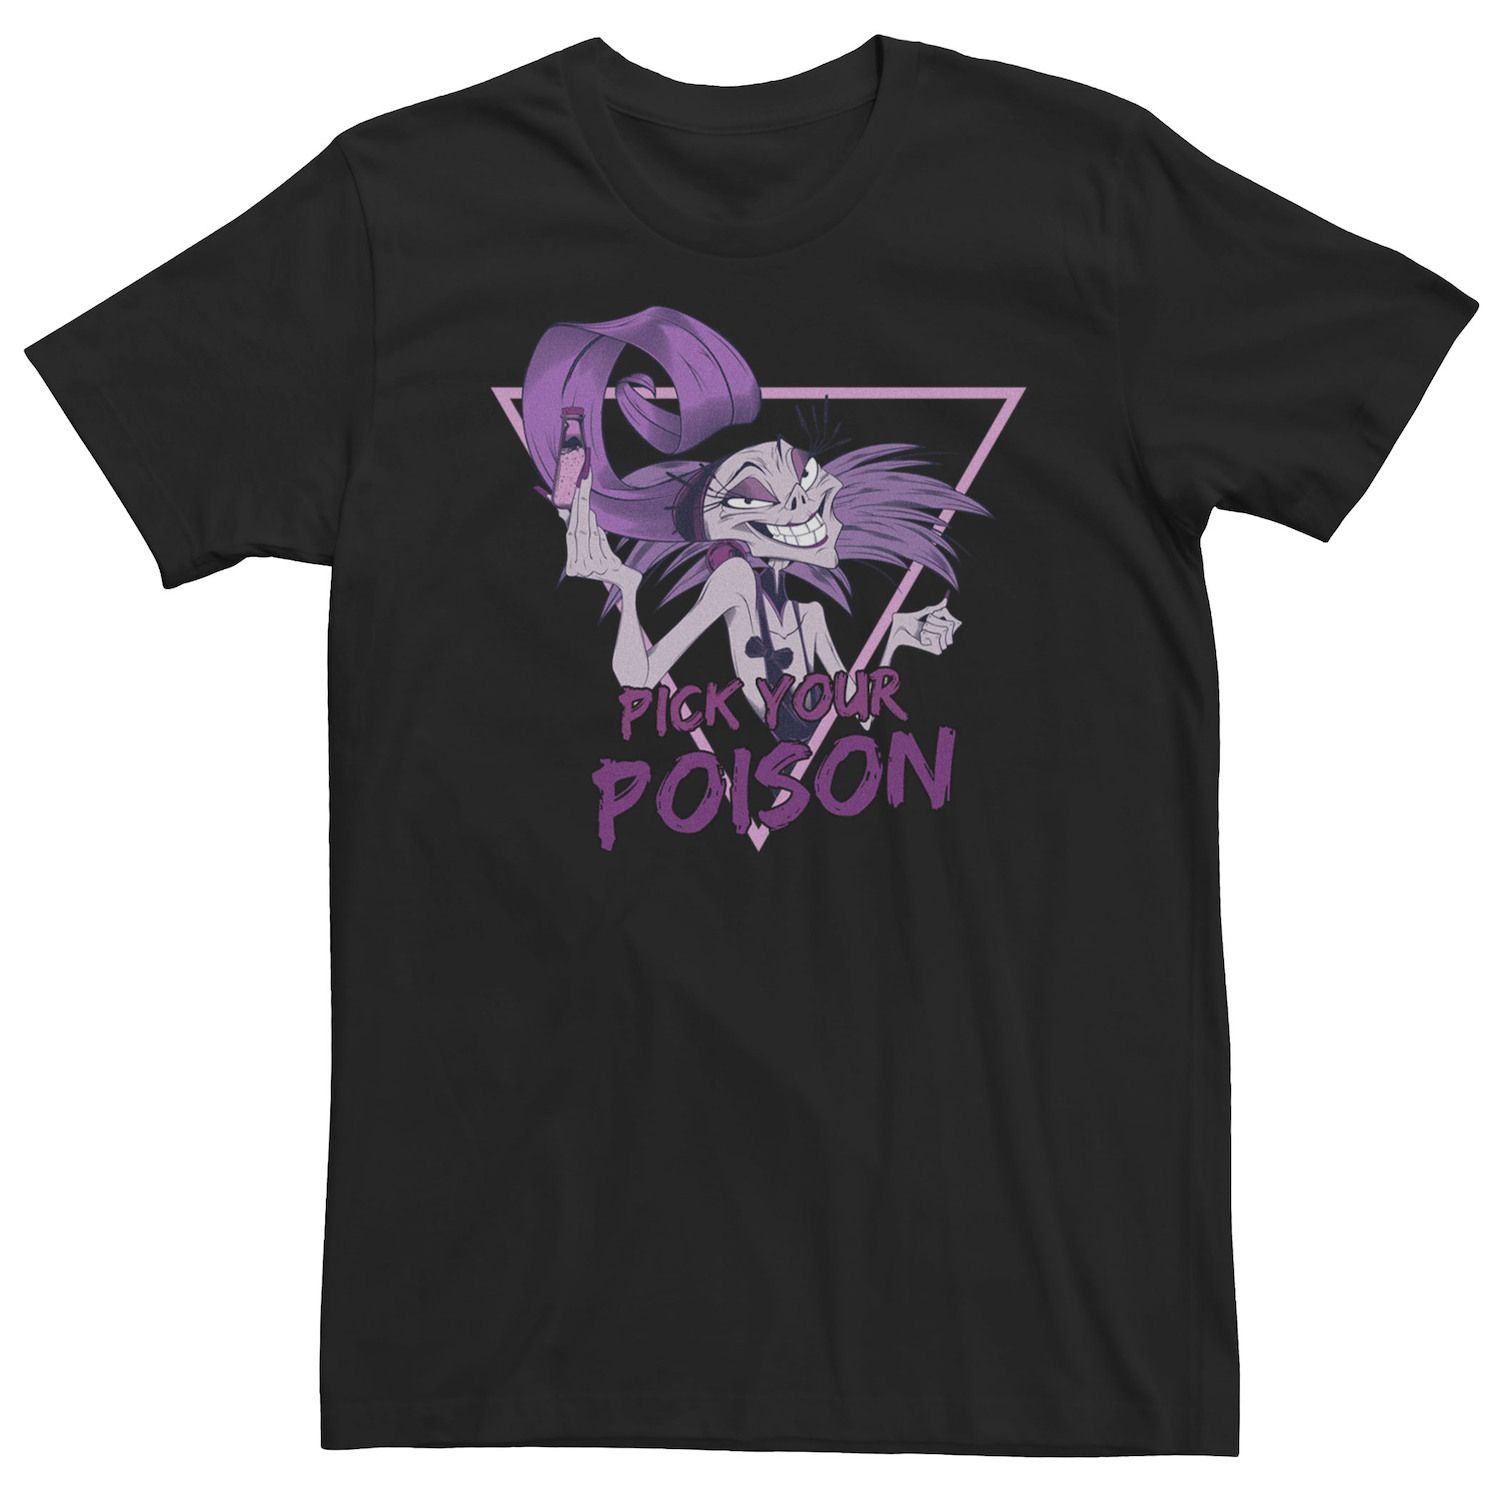 Image for Disney Big & Tall Villains Yzma Pick Your Poison Portrait Tee at Kohl's.